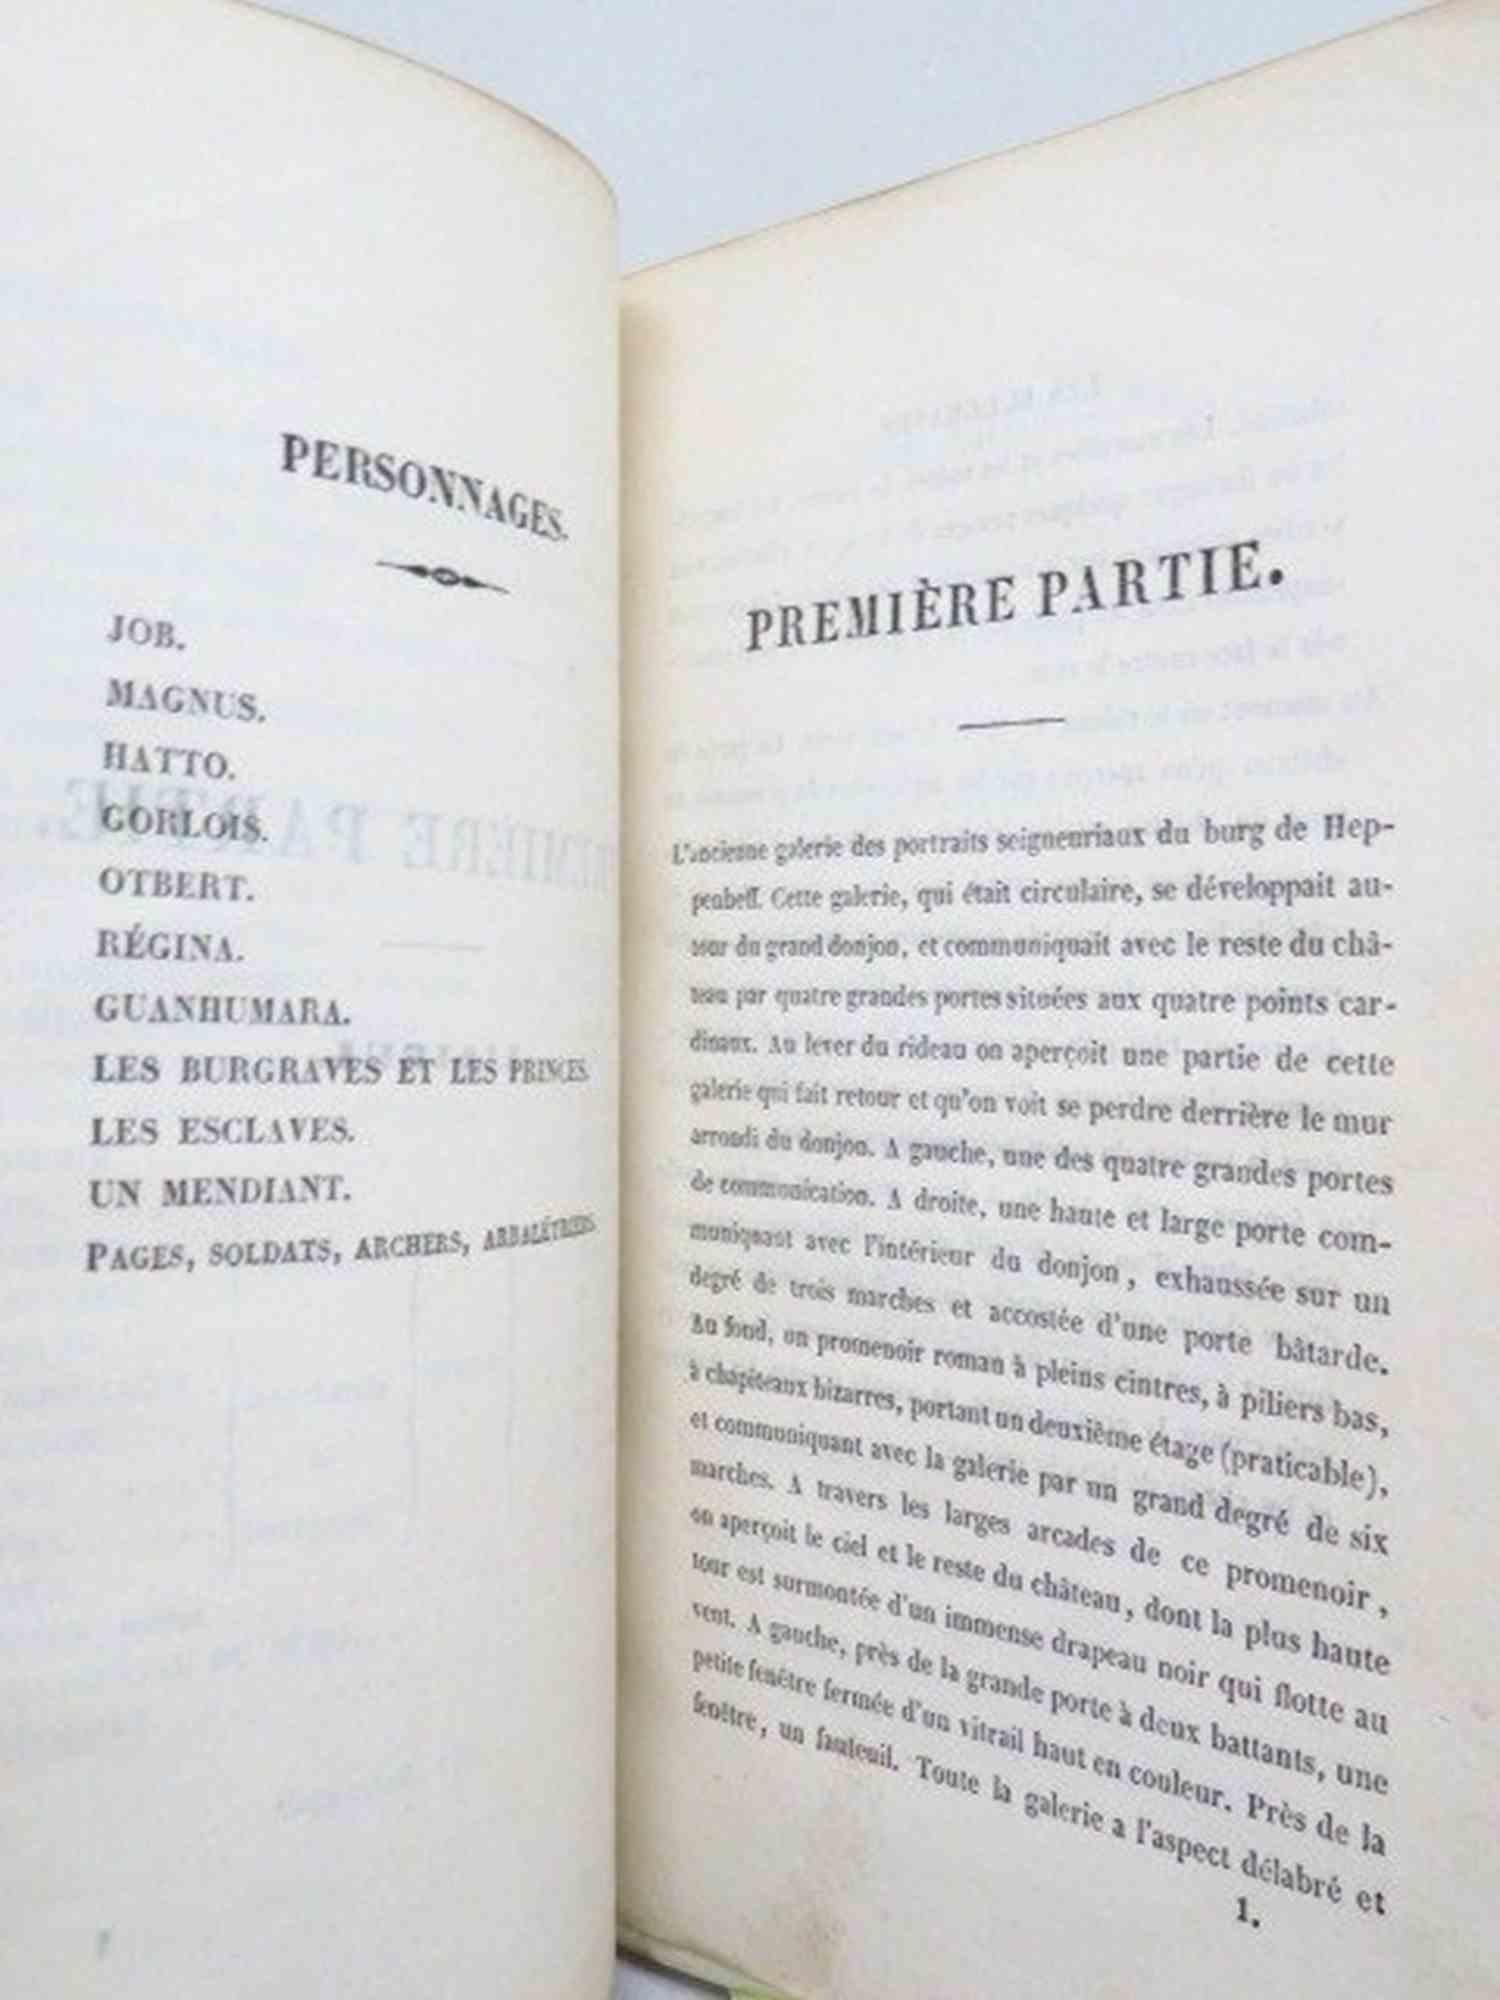 Les Burgraves, une Trilogie - Rare Book by Victor Hugo - 1843 For Sale 2